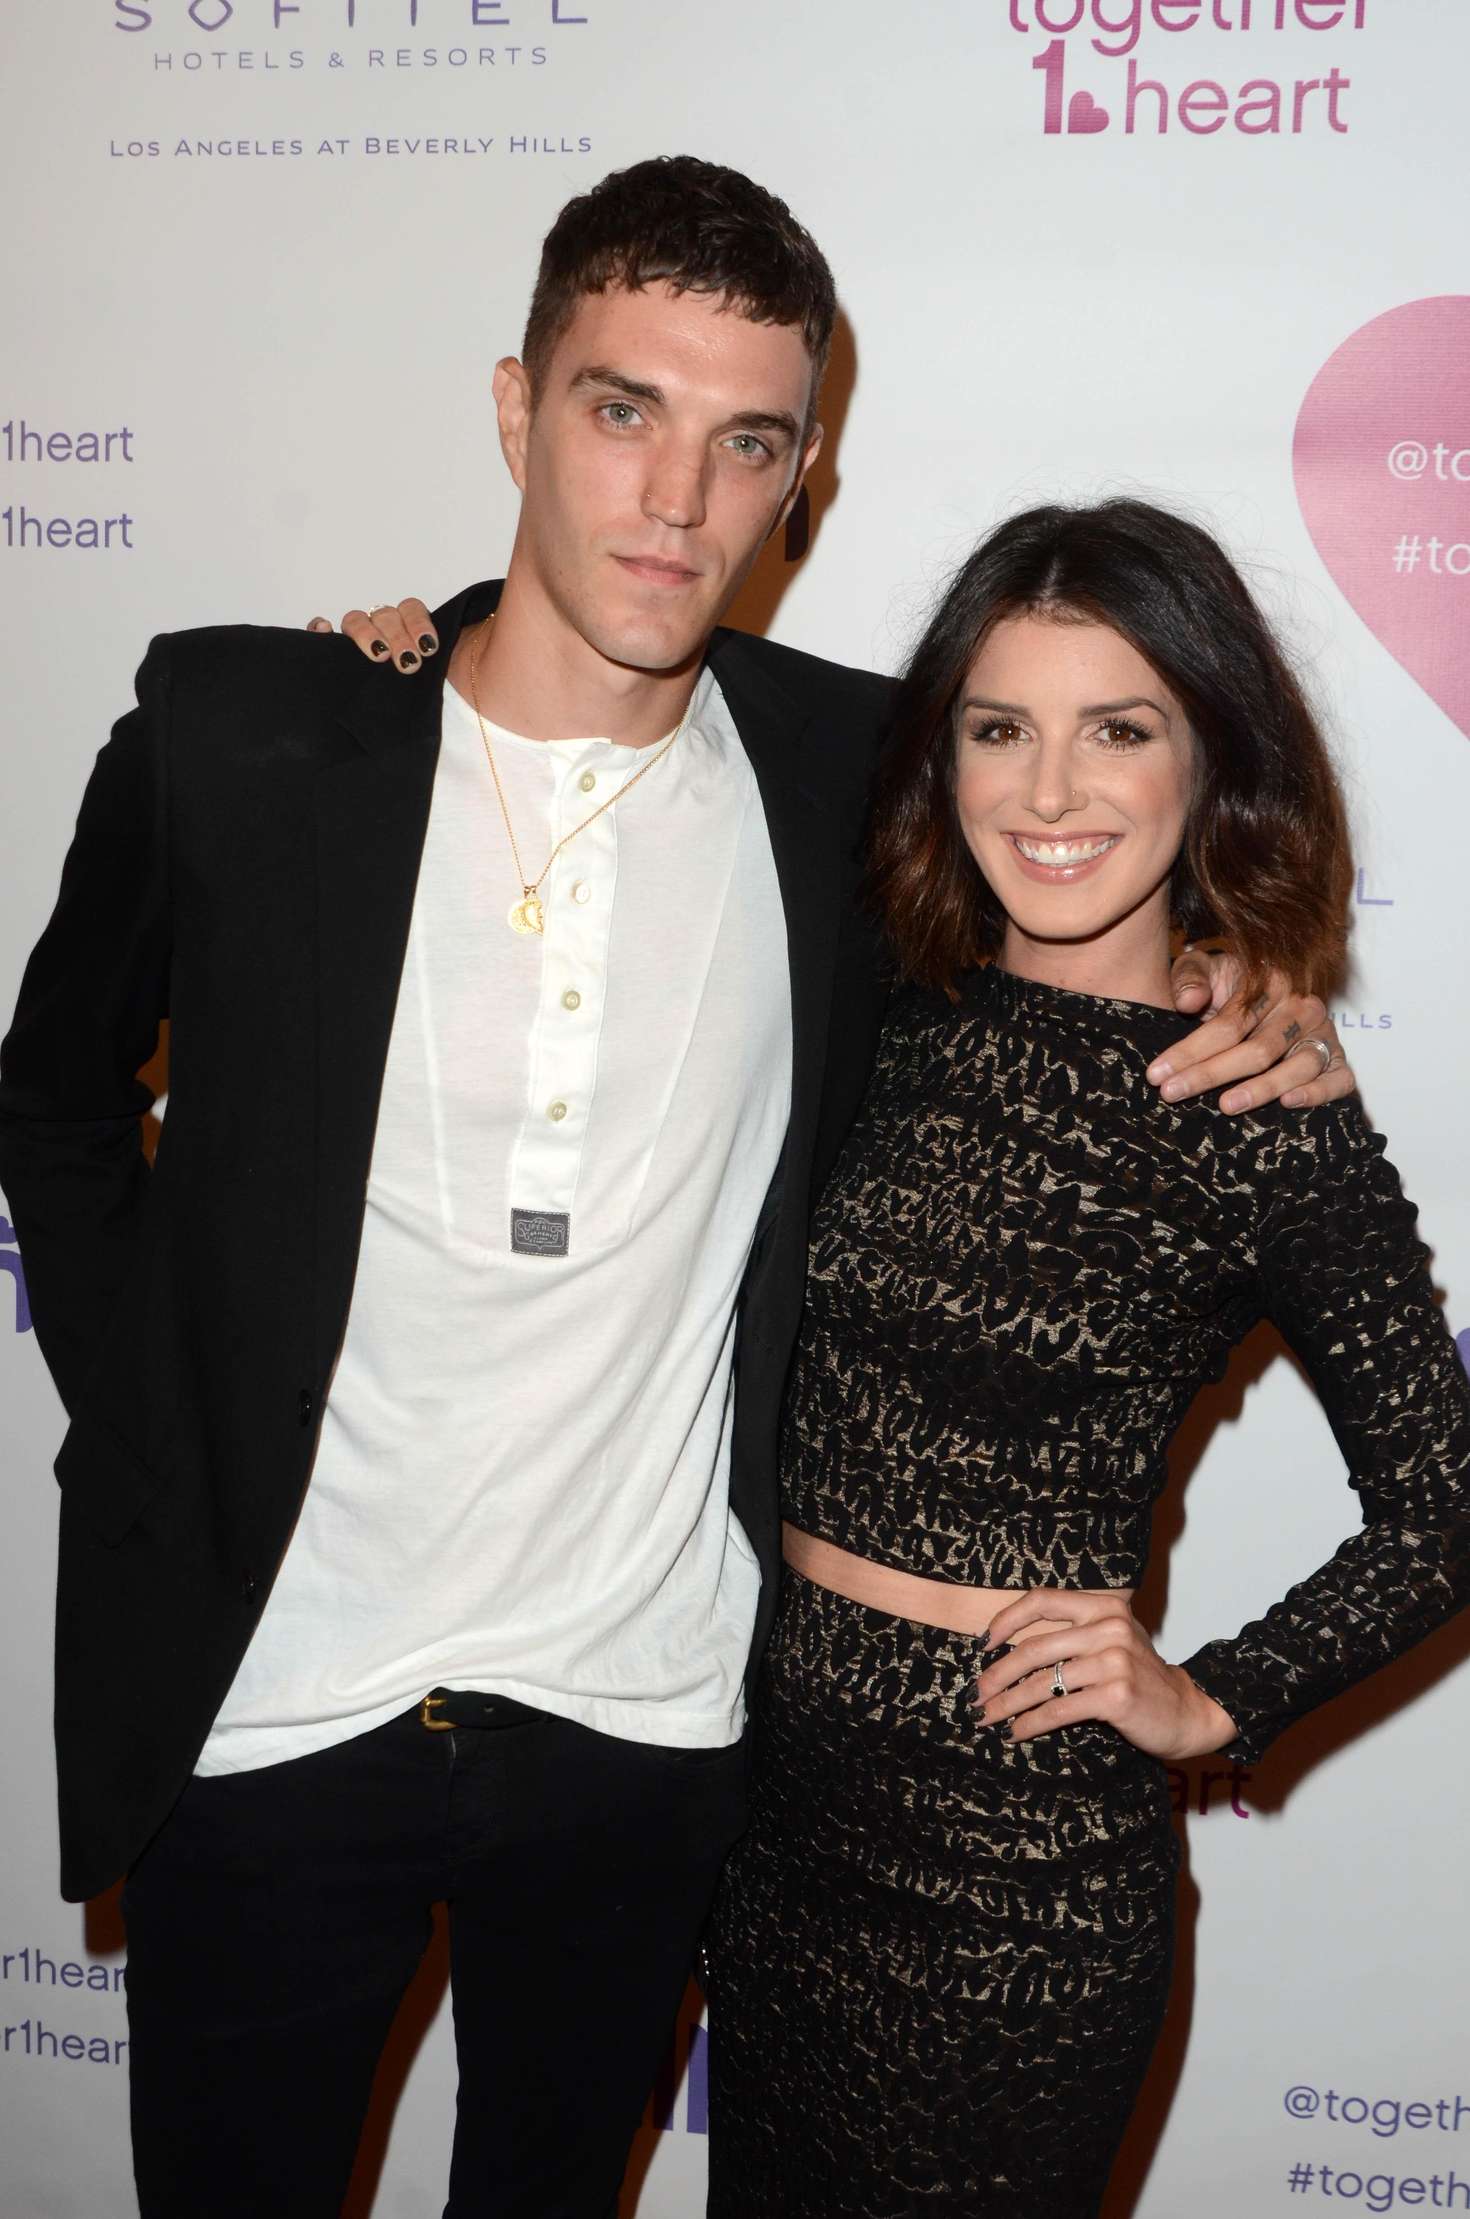 Shenae Grimes together 1 heart Launch Party 06